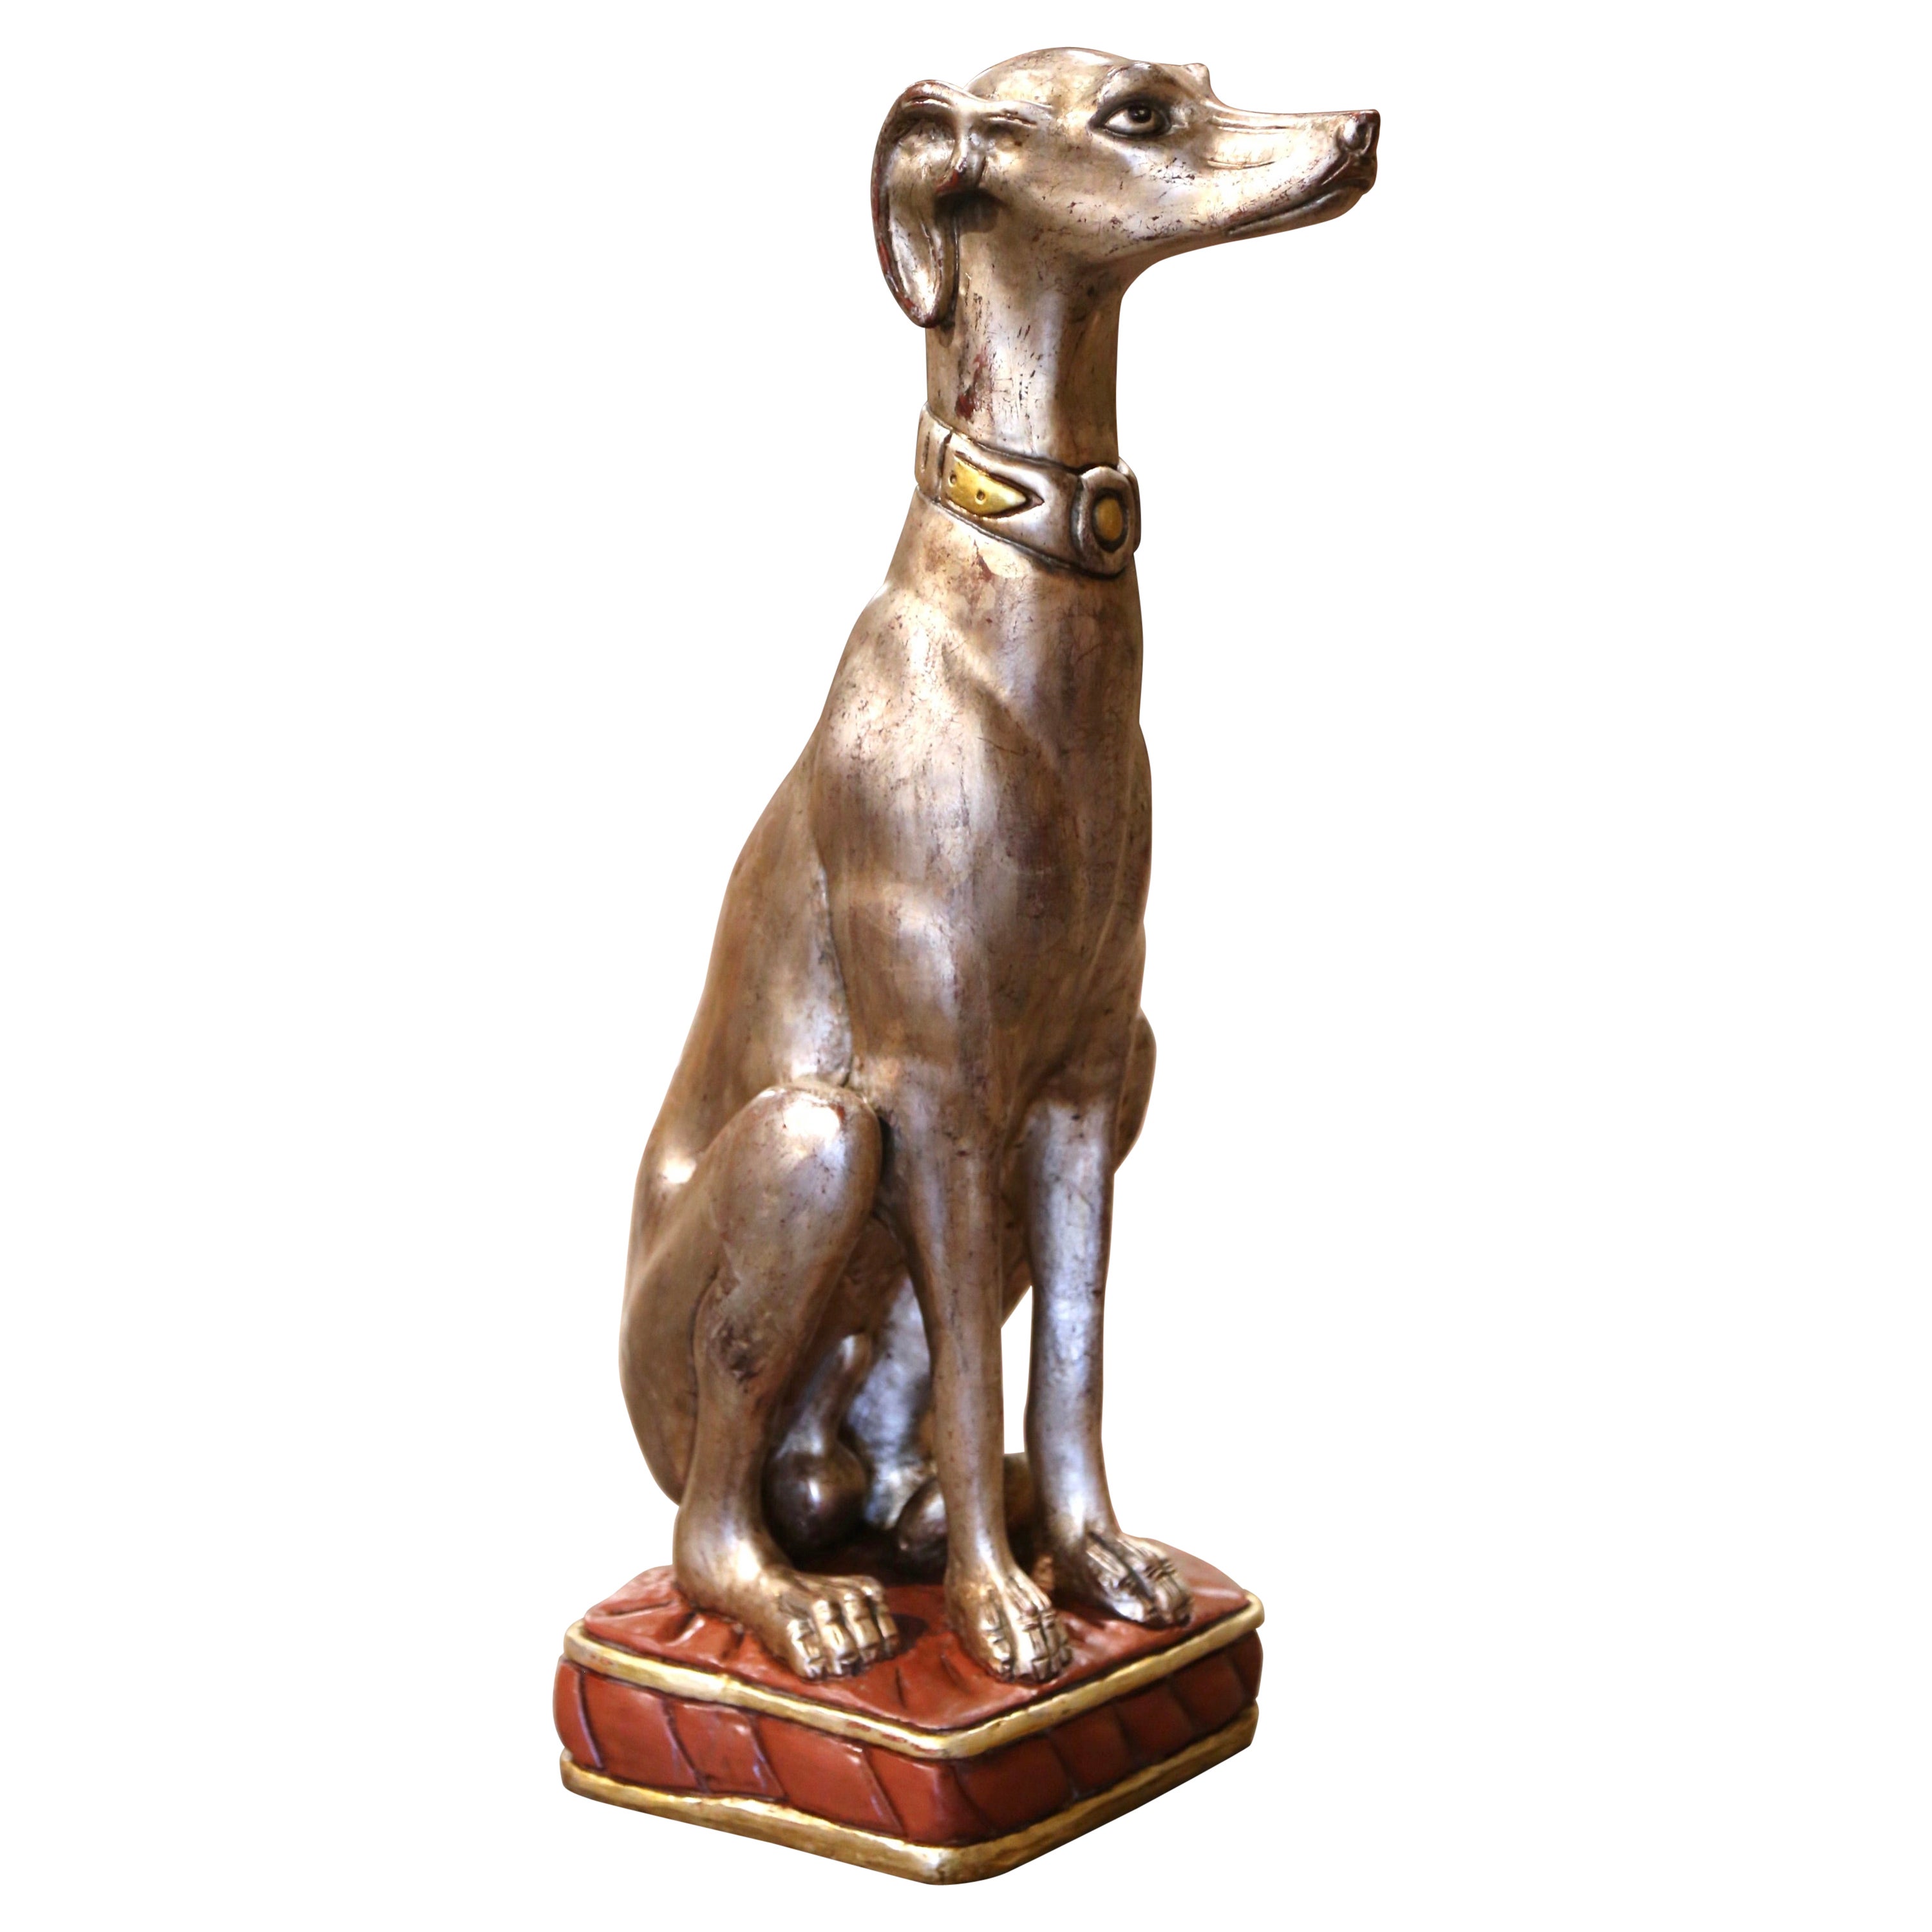 Vintage Italian Carved Wooden and Silvered Greyhound Dog Sculpture